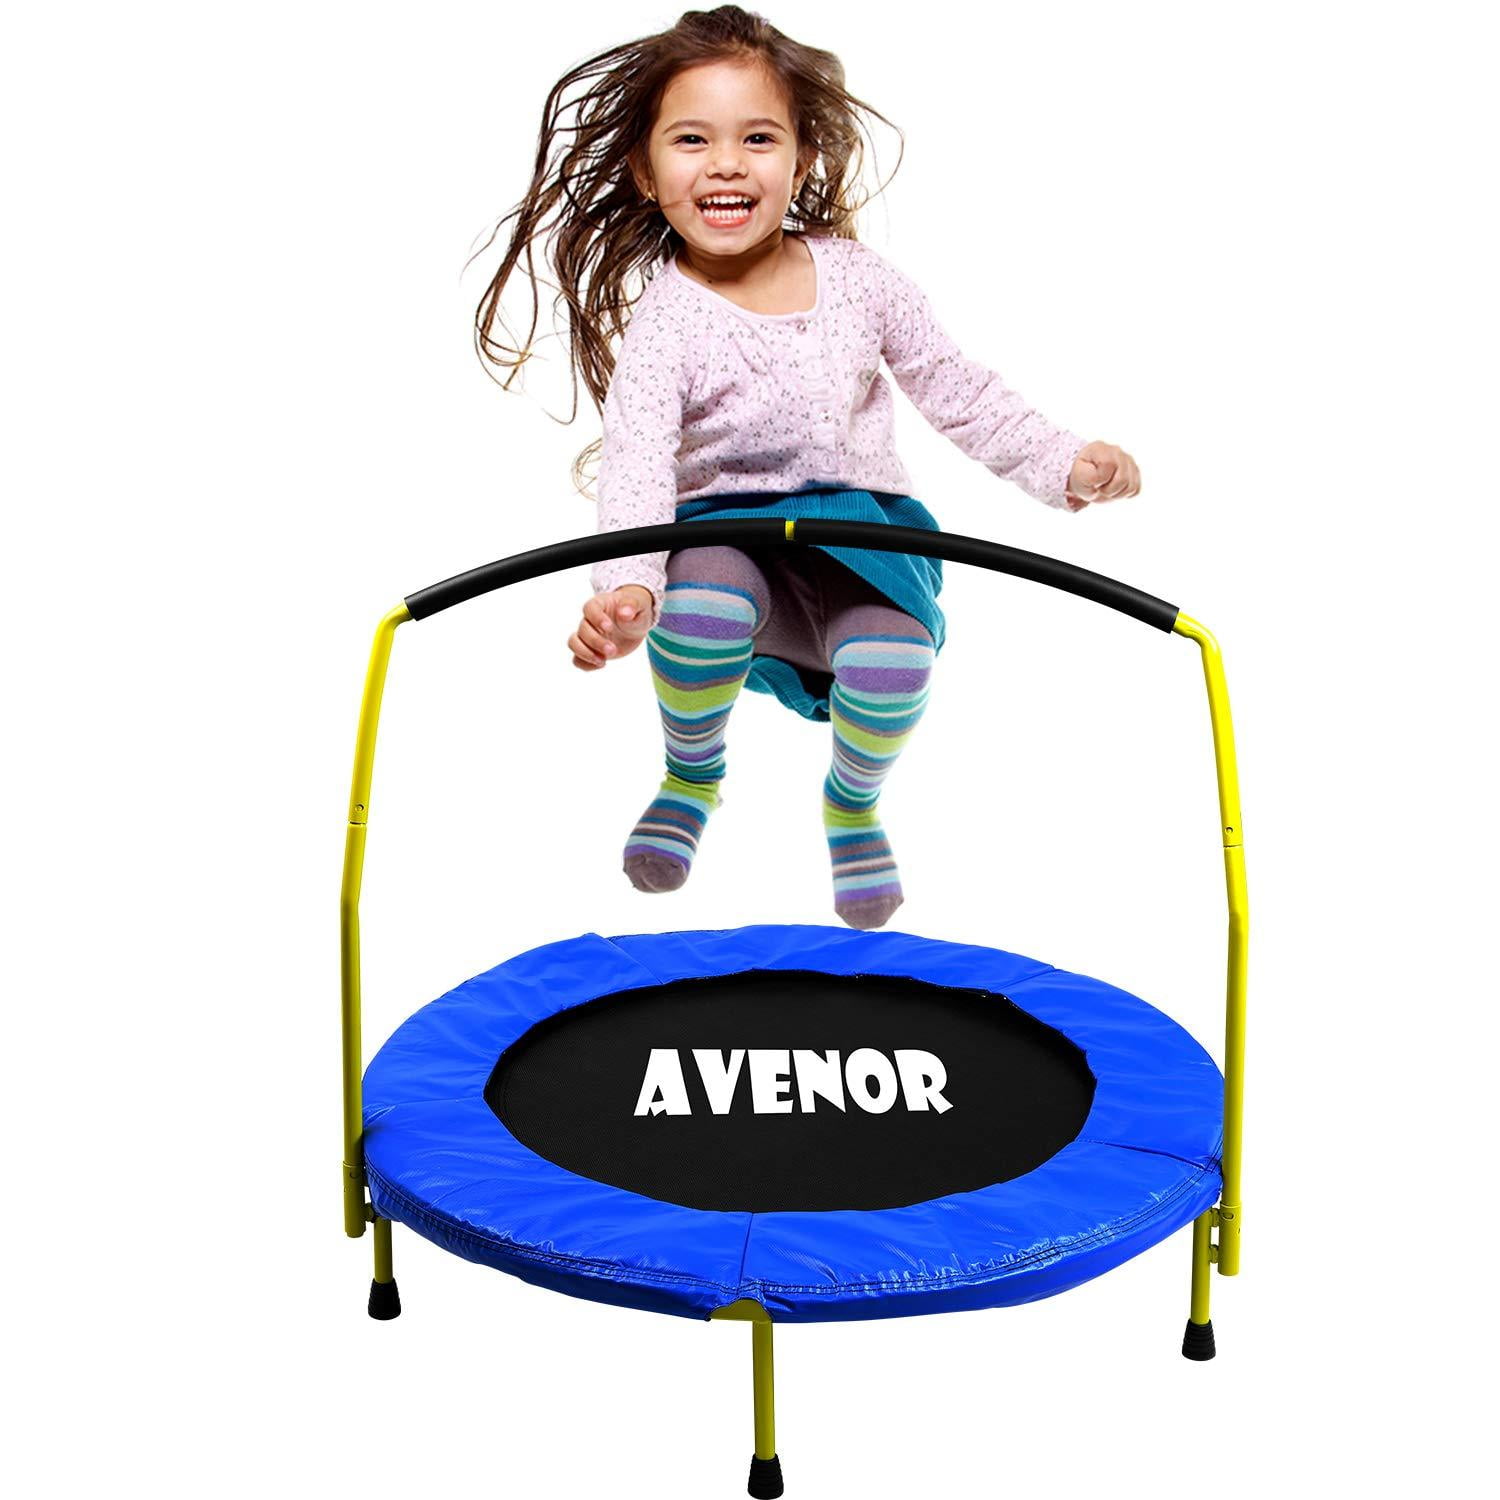 Toddler Trampoline With Handle - 36" Kids Trampoline With Handle - Mini